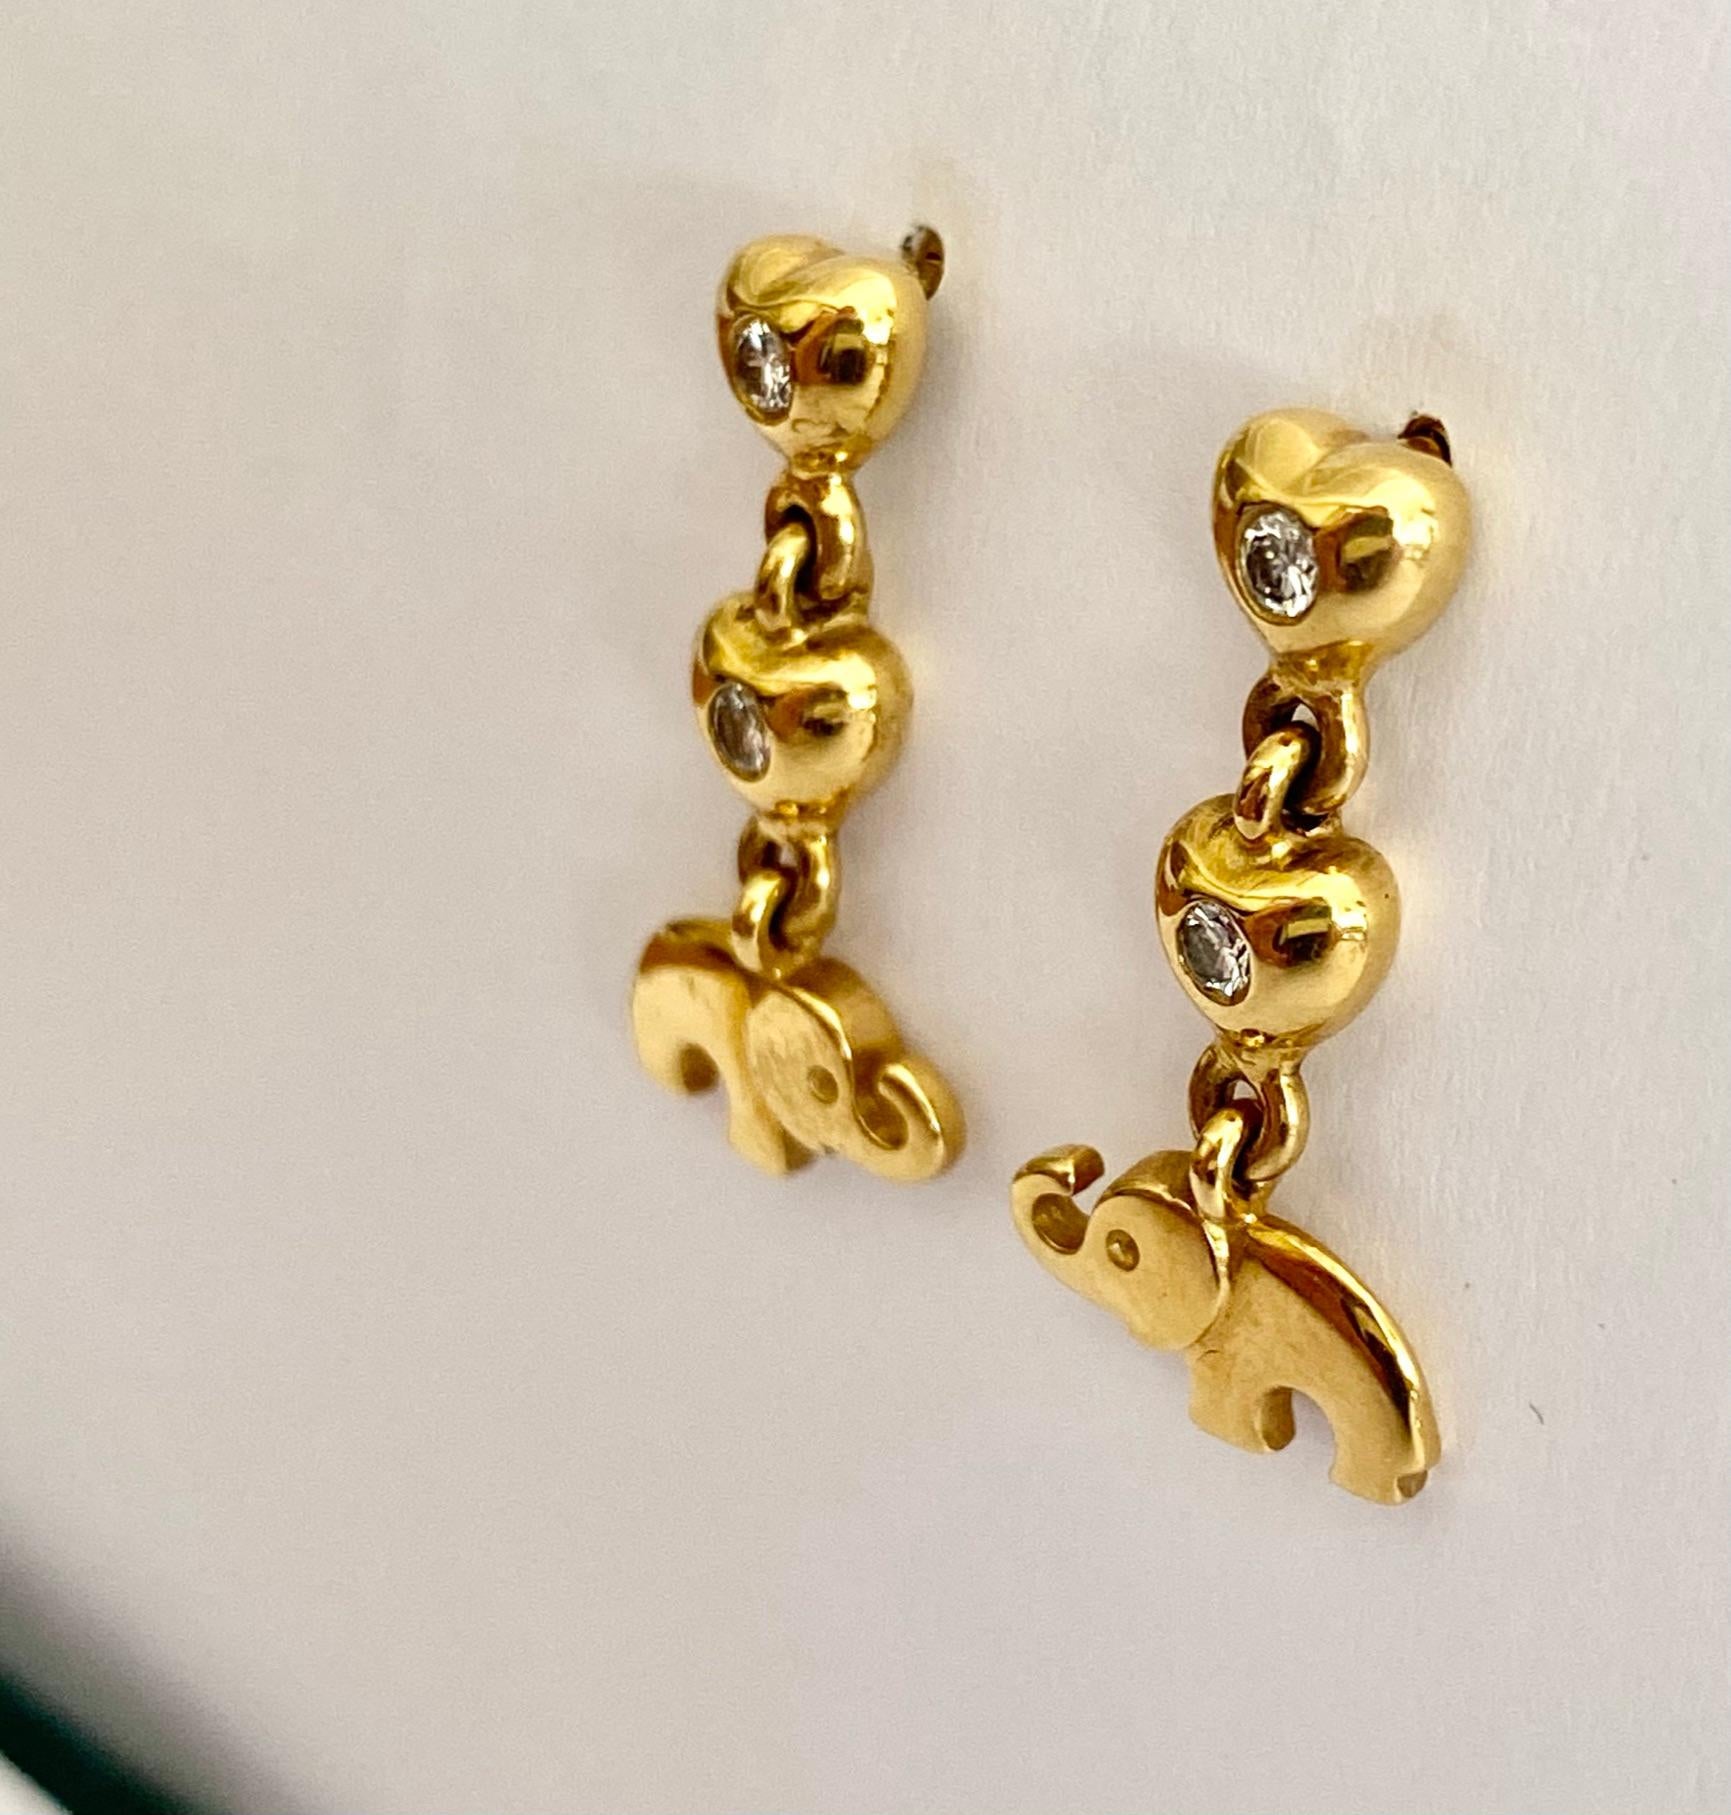 One (1) 18 karat Yellow Gold pair of Earrings, stamped 750 & C'est Laudier.
Made in Germany ca 1995  
4 round Brilliant cut Diamonds = 0.22 ct VS - G 
Weight: 6.21 grams
Measurements:   22 x 10 x= 2 mm
New Old Stock.